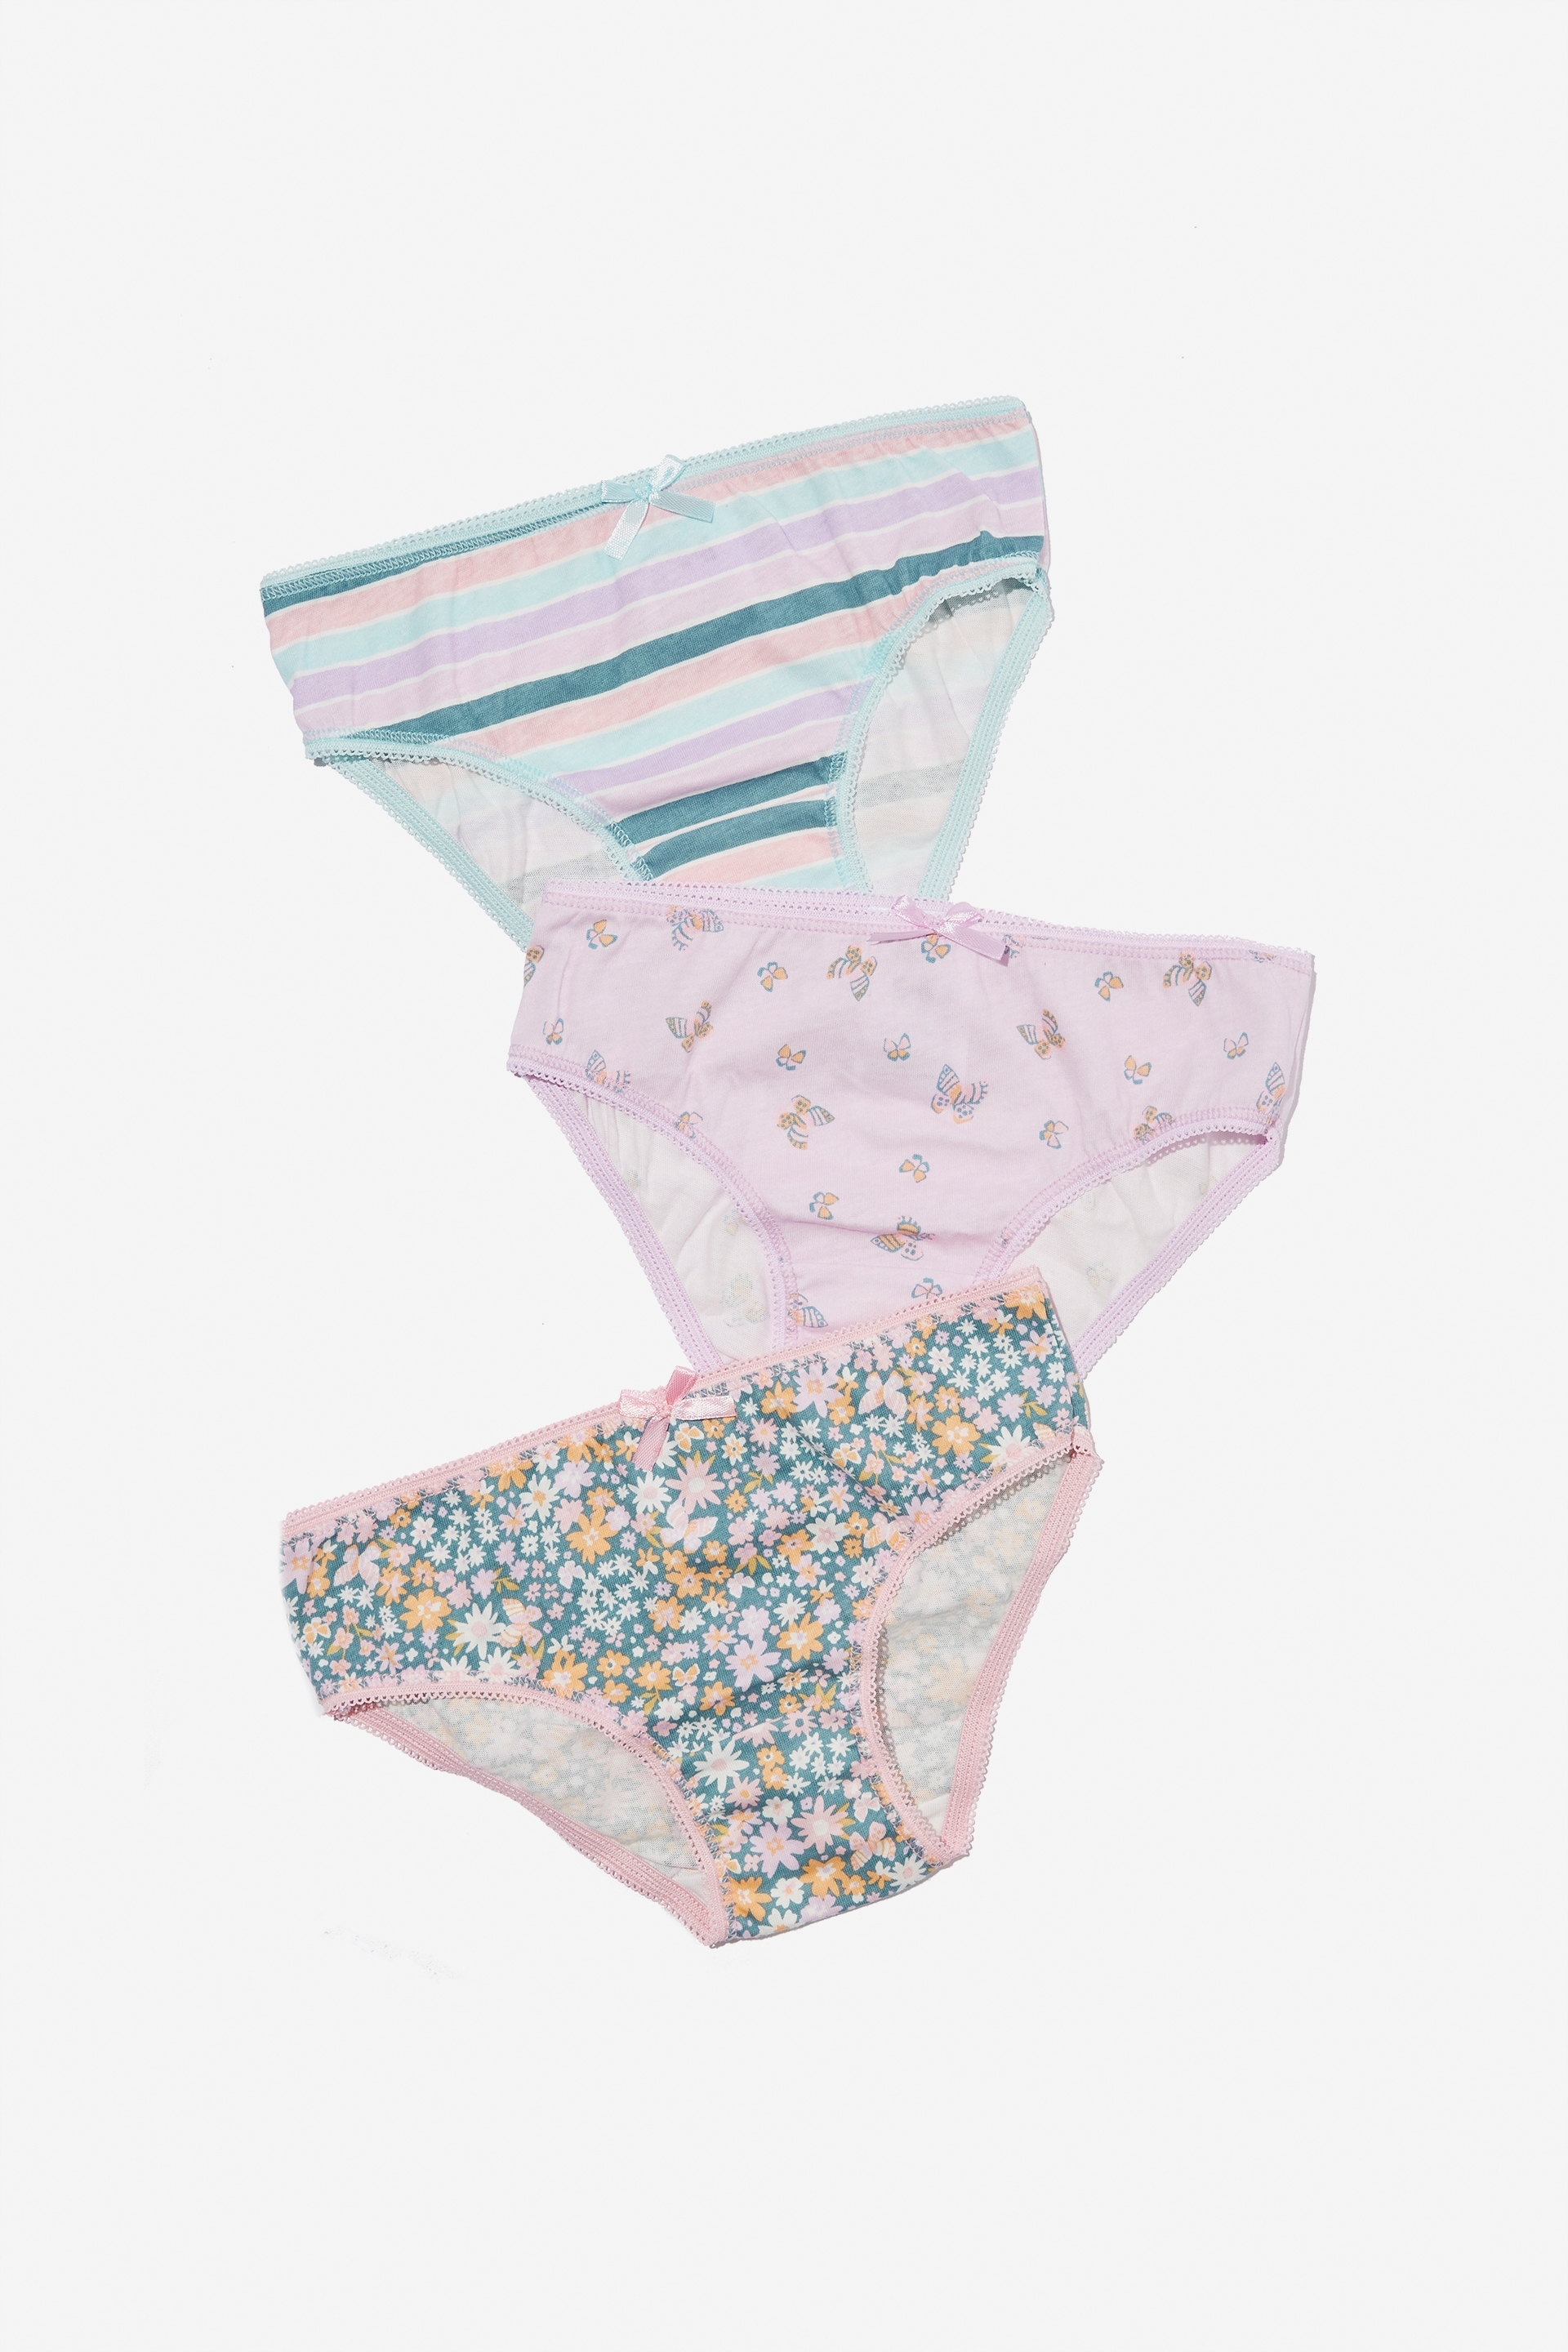 Cotton On Kids - 3 Pack Girls Underwear - Butterfly floral/pale violet